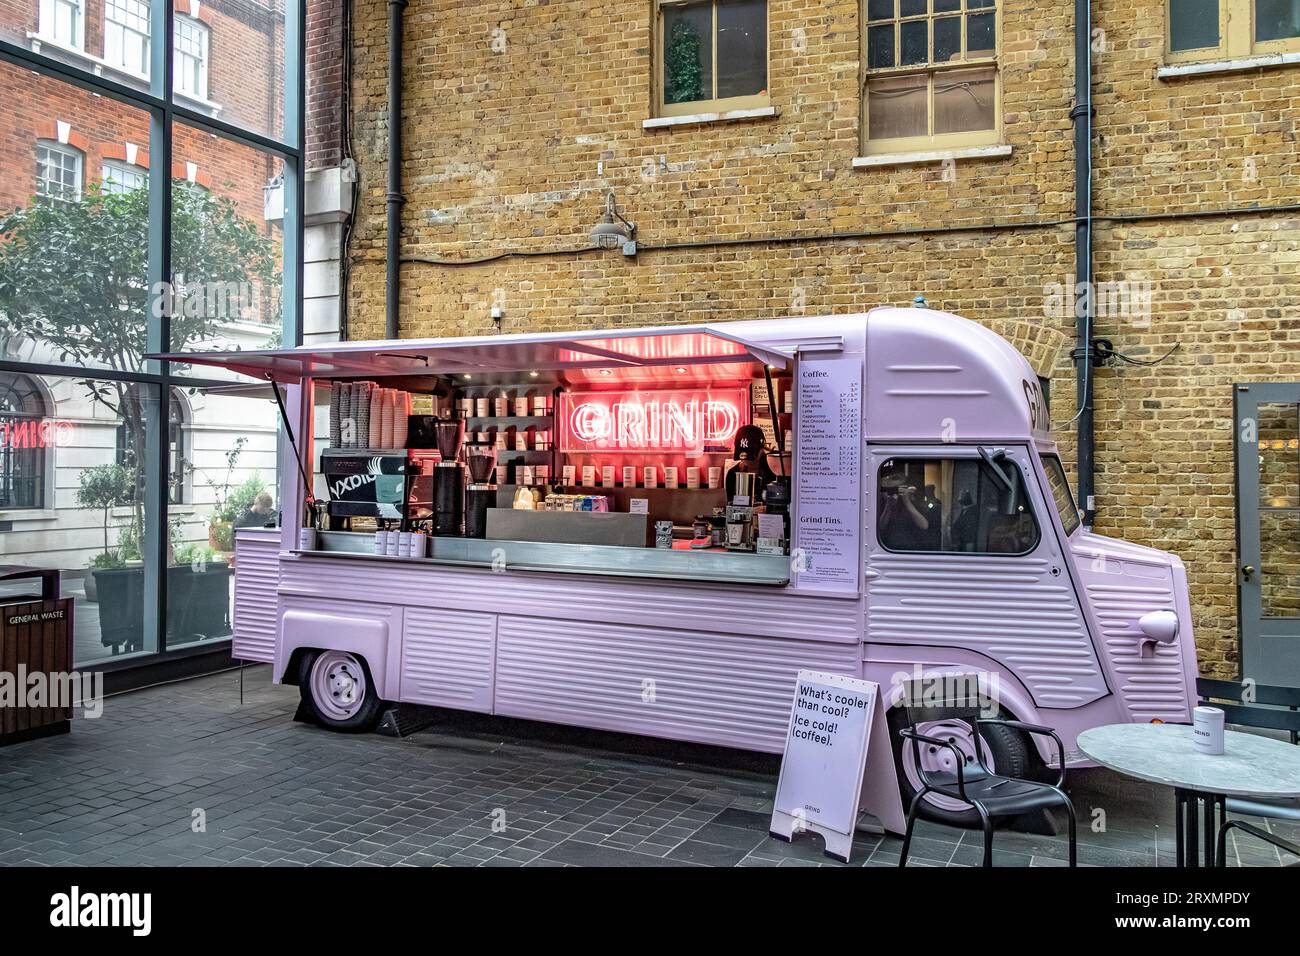 A Grind coffee truck serving coffee at Old Spitalfields Market, London E1 Stock Photo